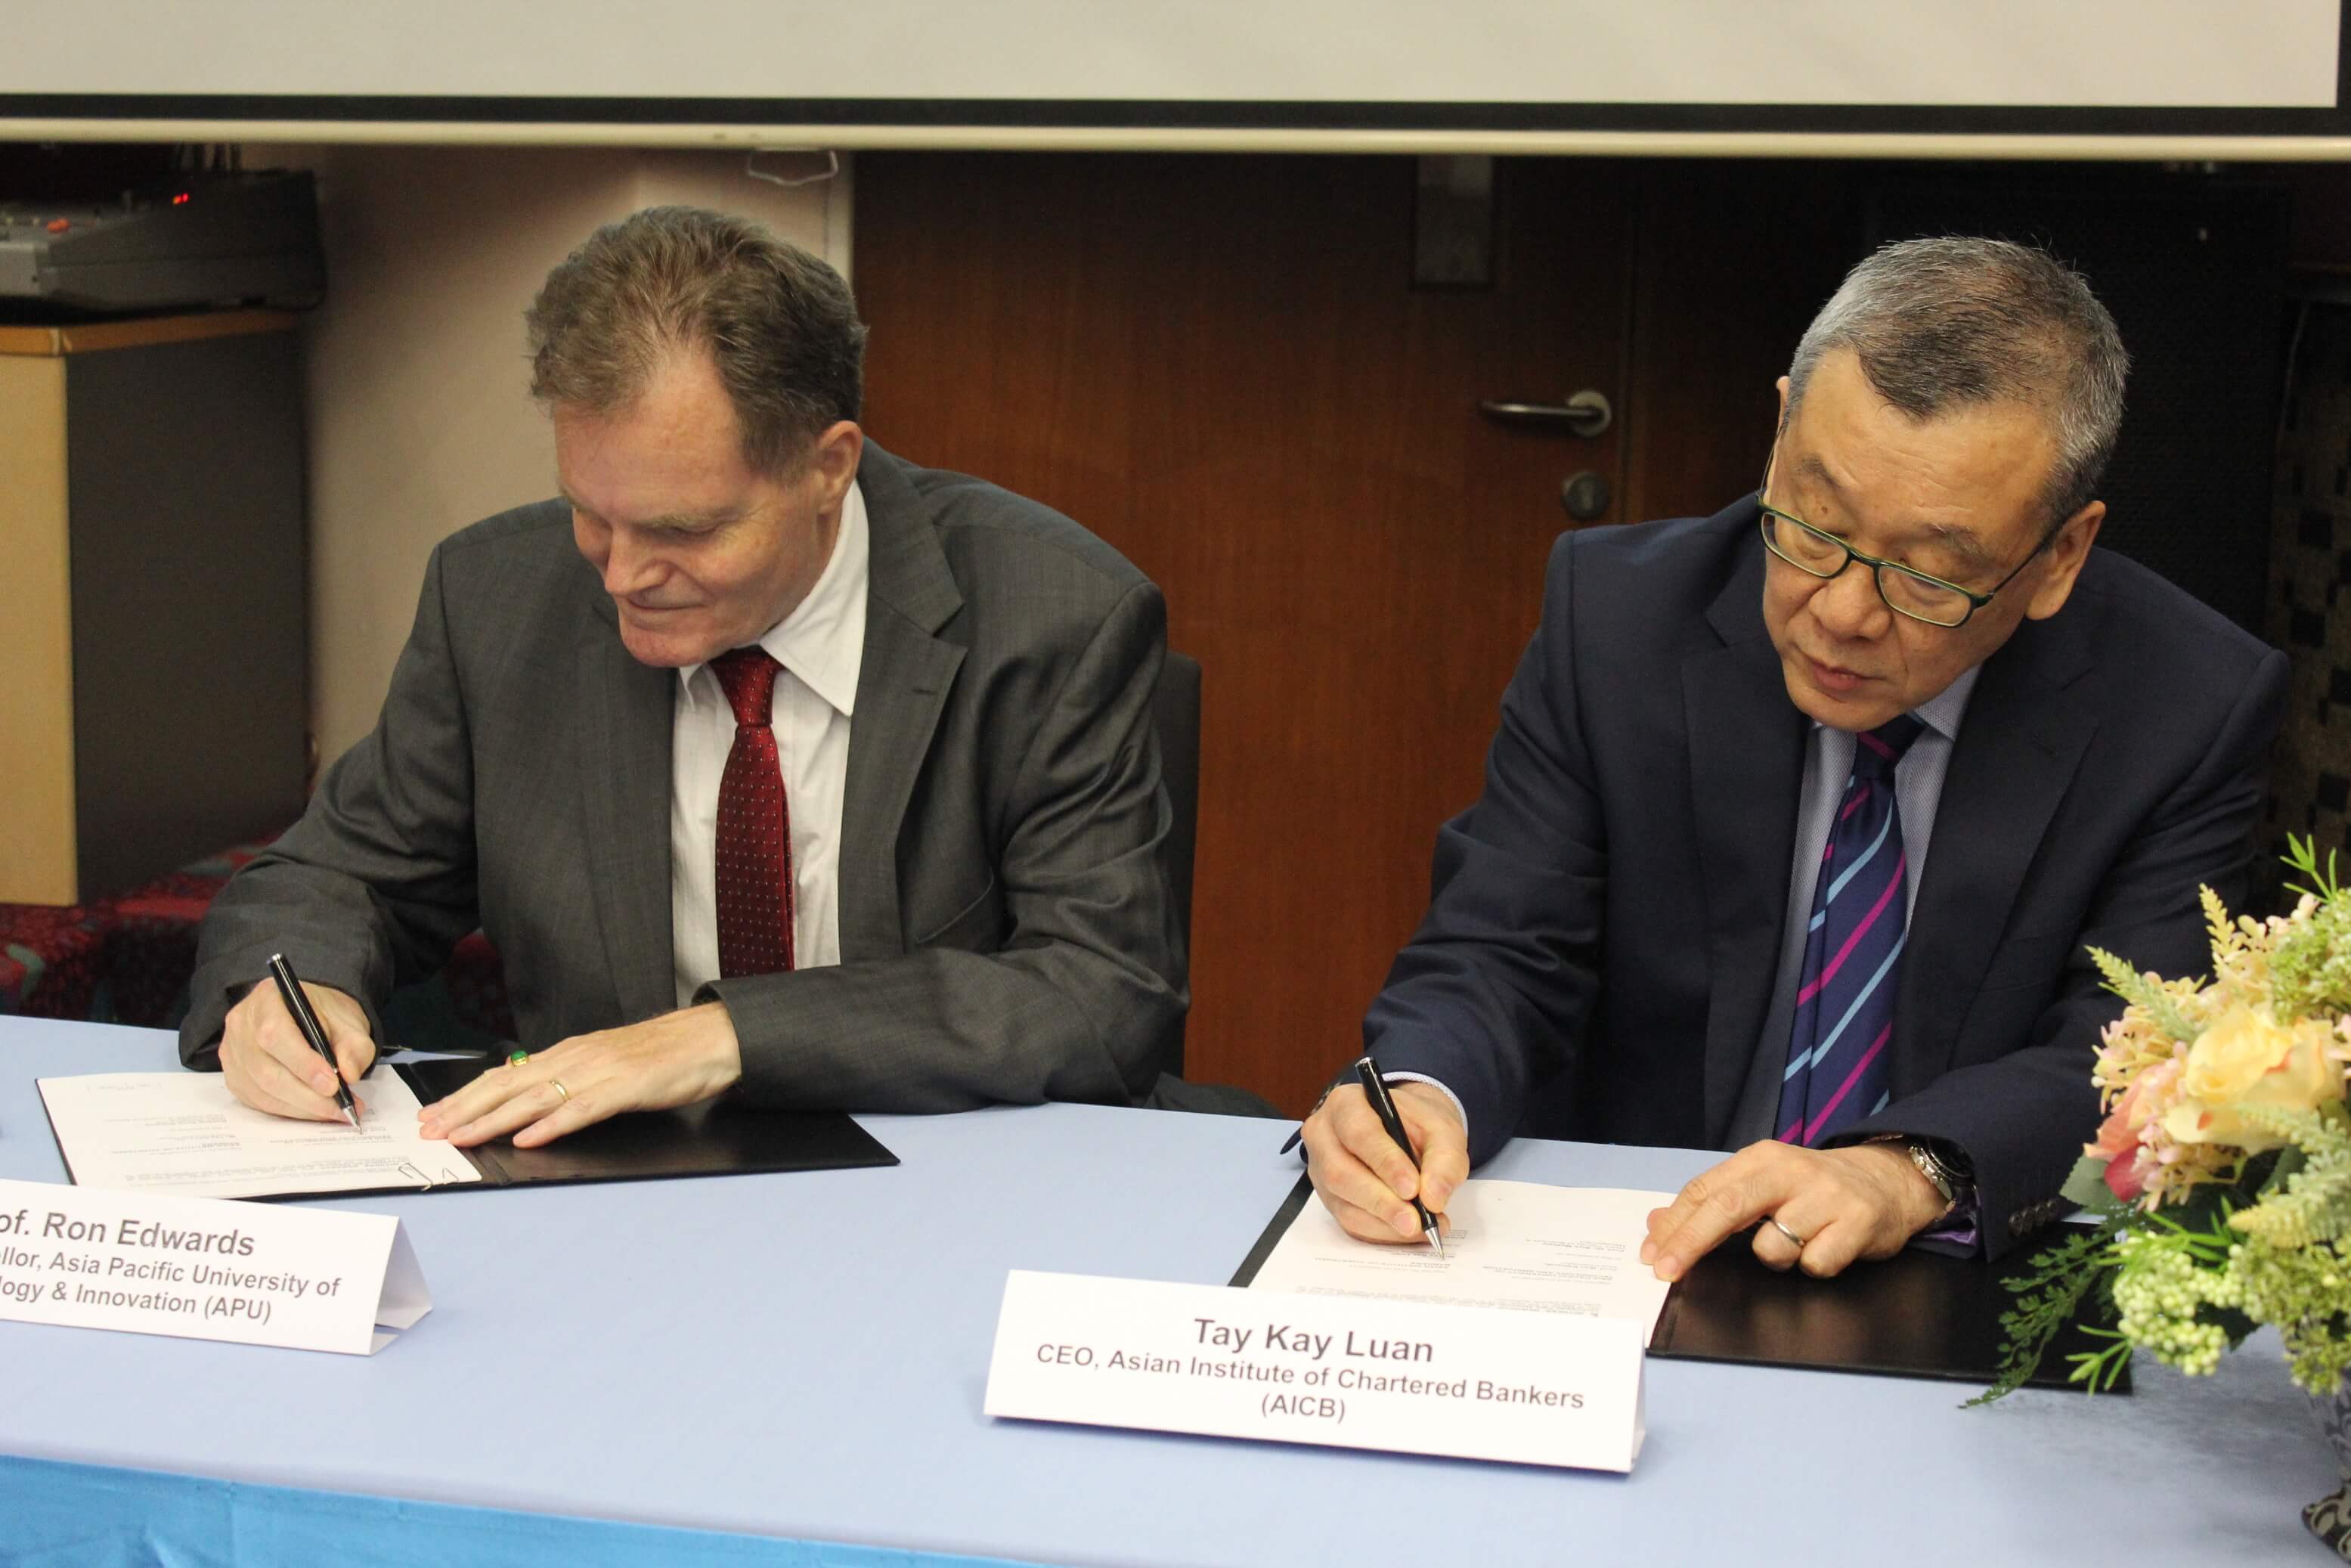 The Memorandum of Understanding was signed by Prof. Ron Edwards, Vice Chancellor, APU (left) and Tay Lay Kuan, CEO, AICB (right).